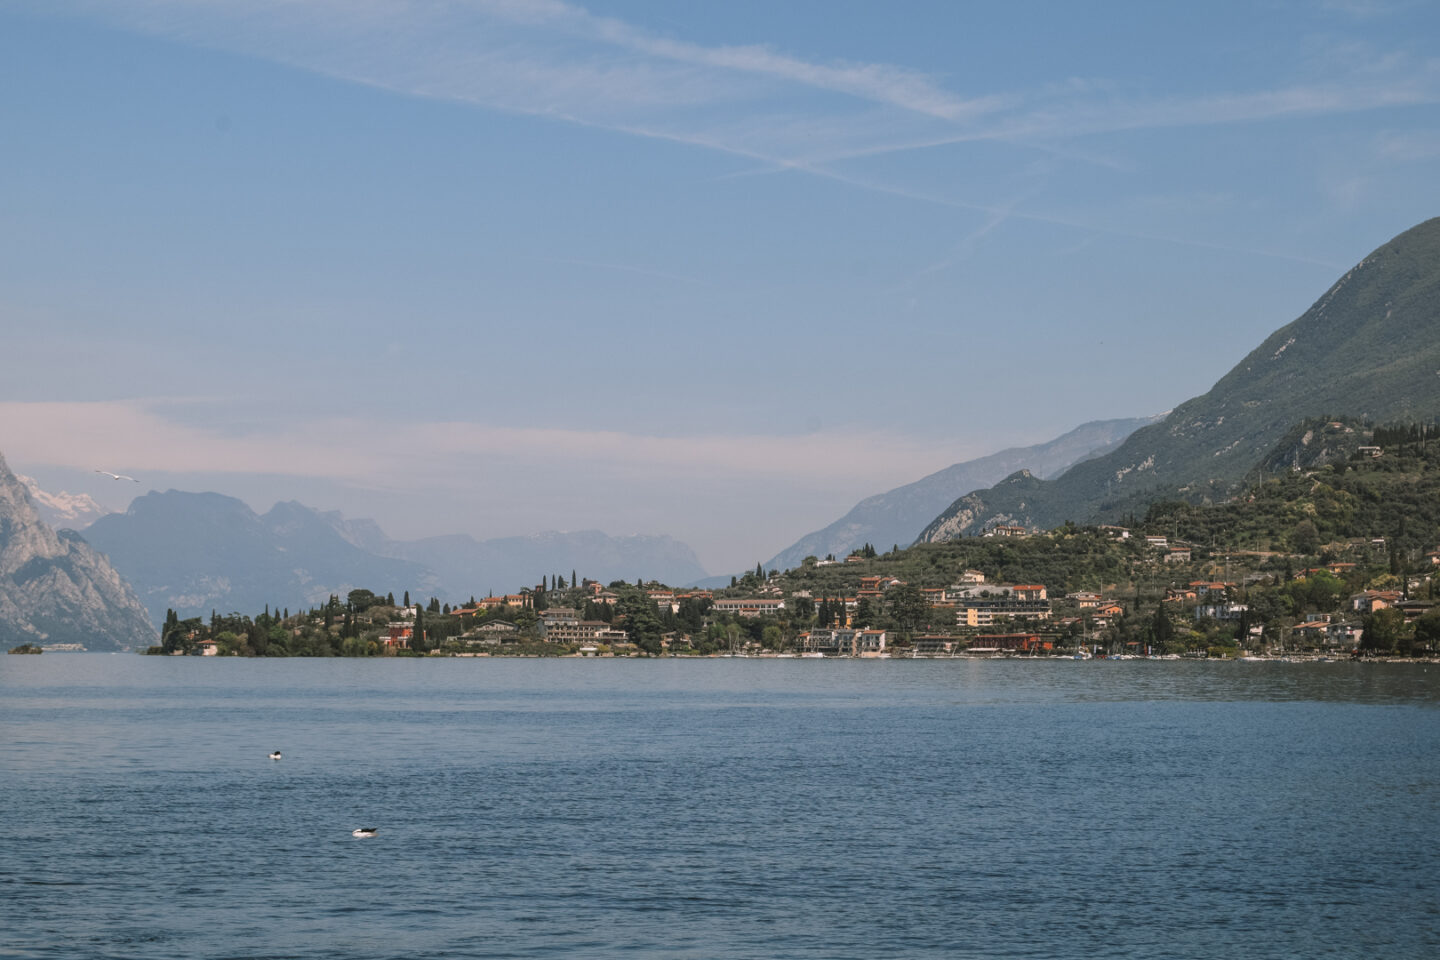 The view over Lake Garda with towns and the mountains in the distance